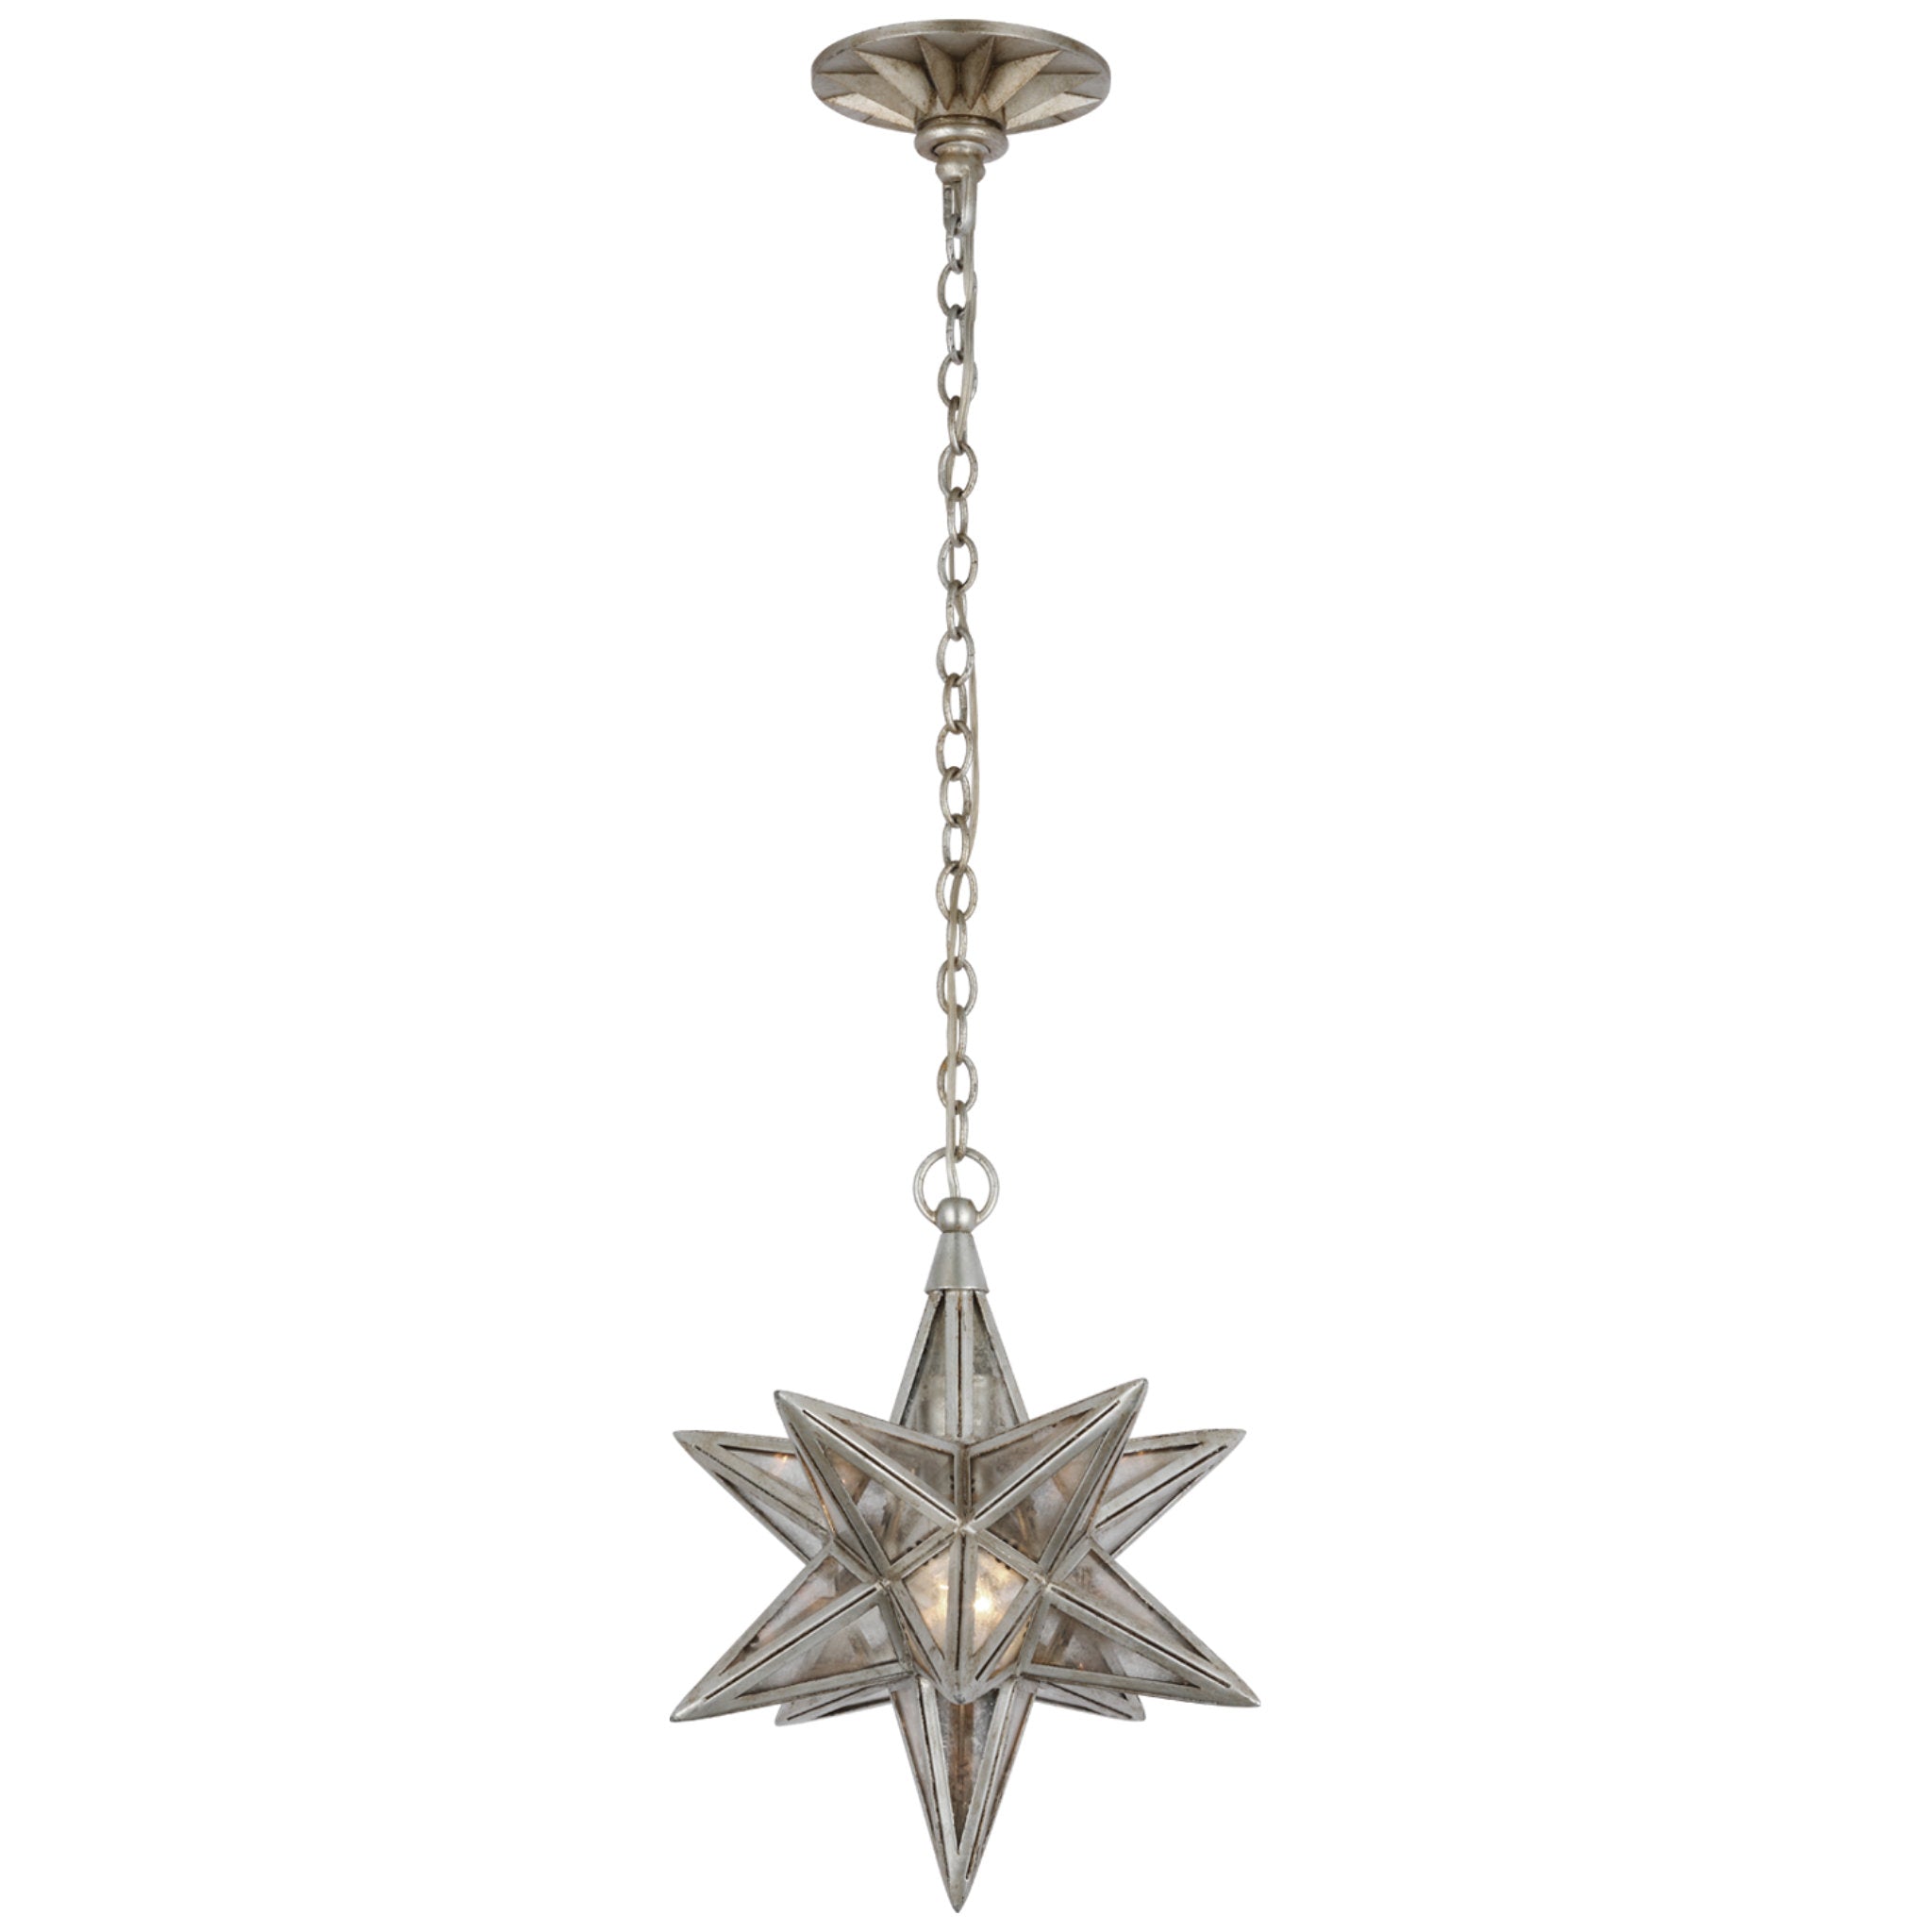 Chapman & Myers Moravian Small Star Lantern in Burnished Silver Leaf with Antique Mirror